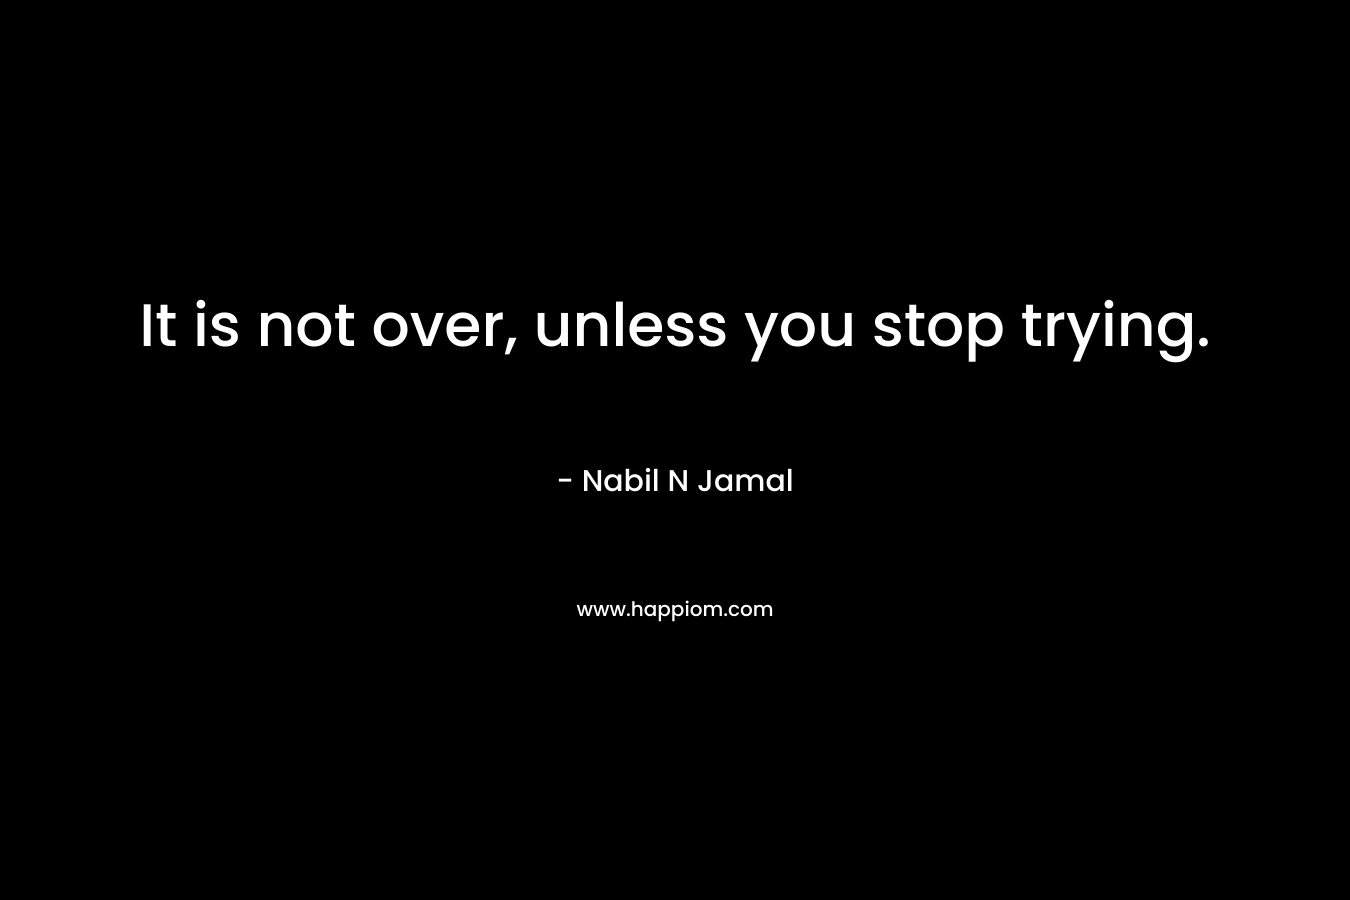 It is not over, unless you stop trying.